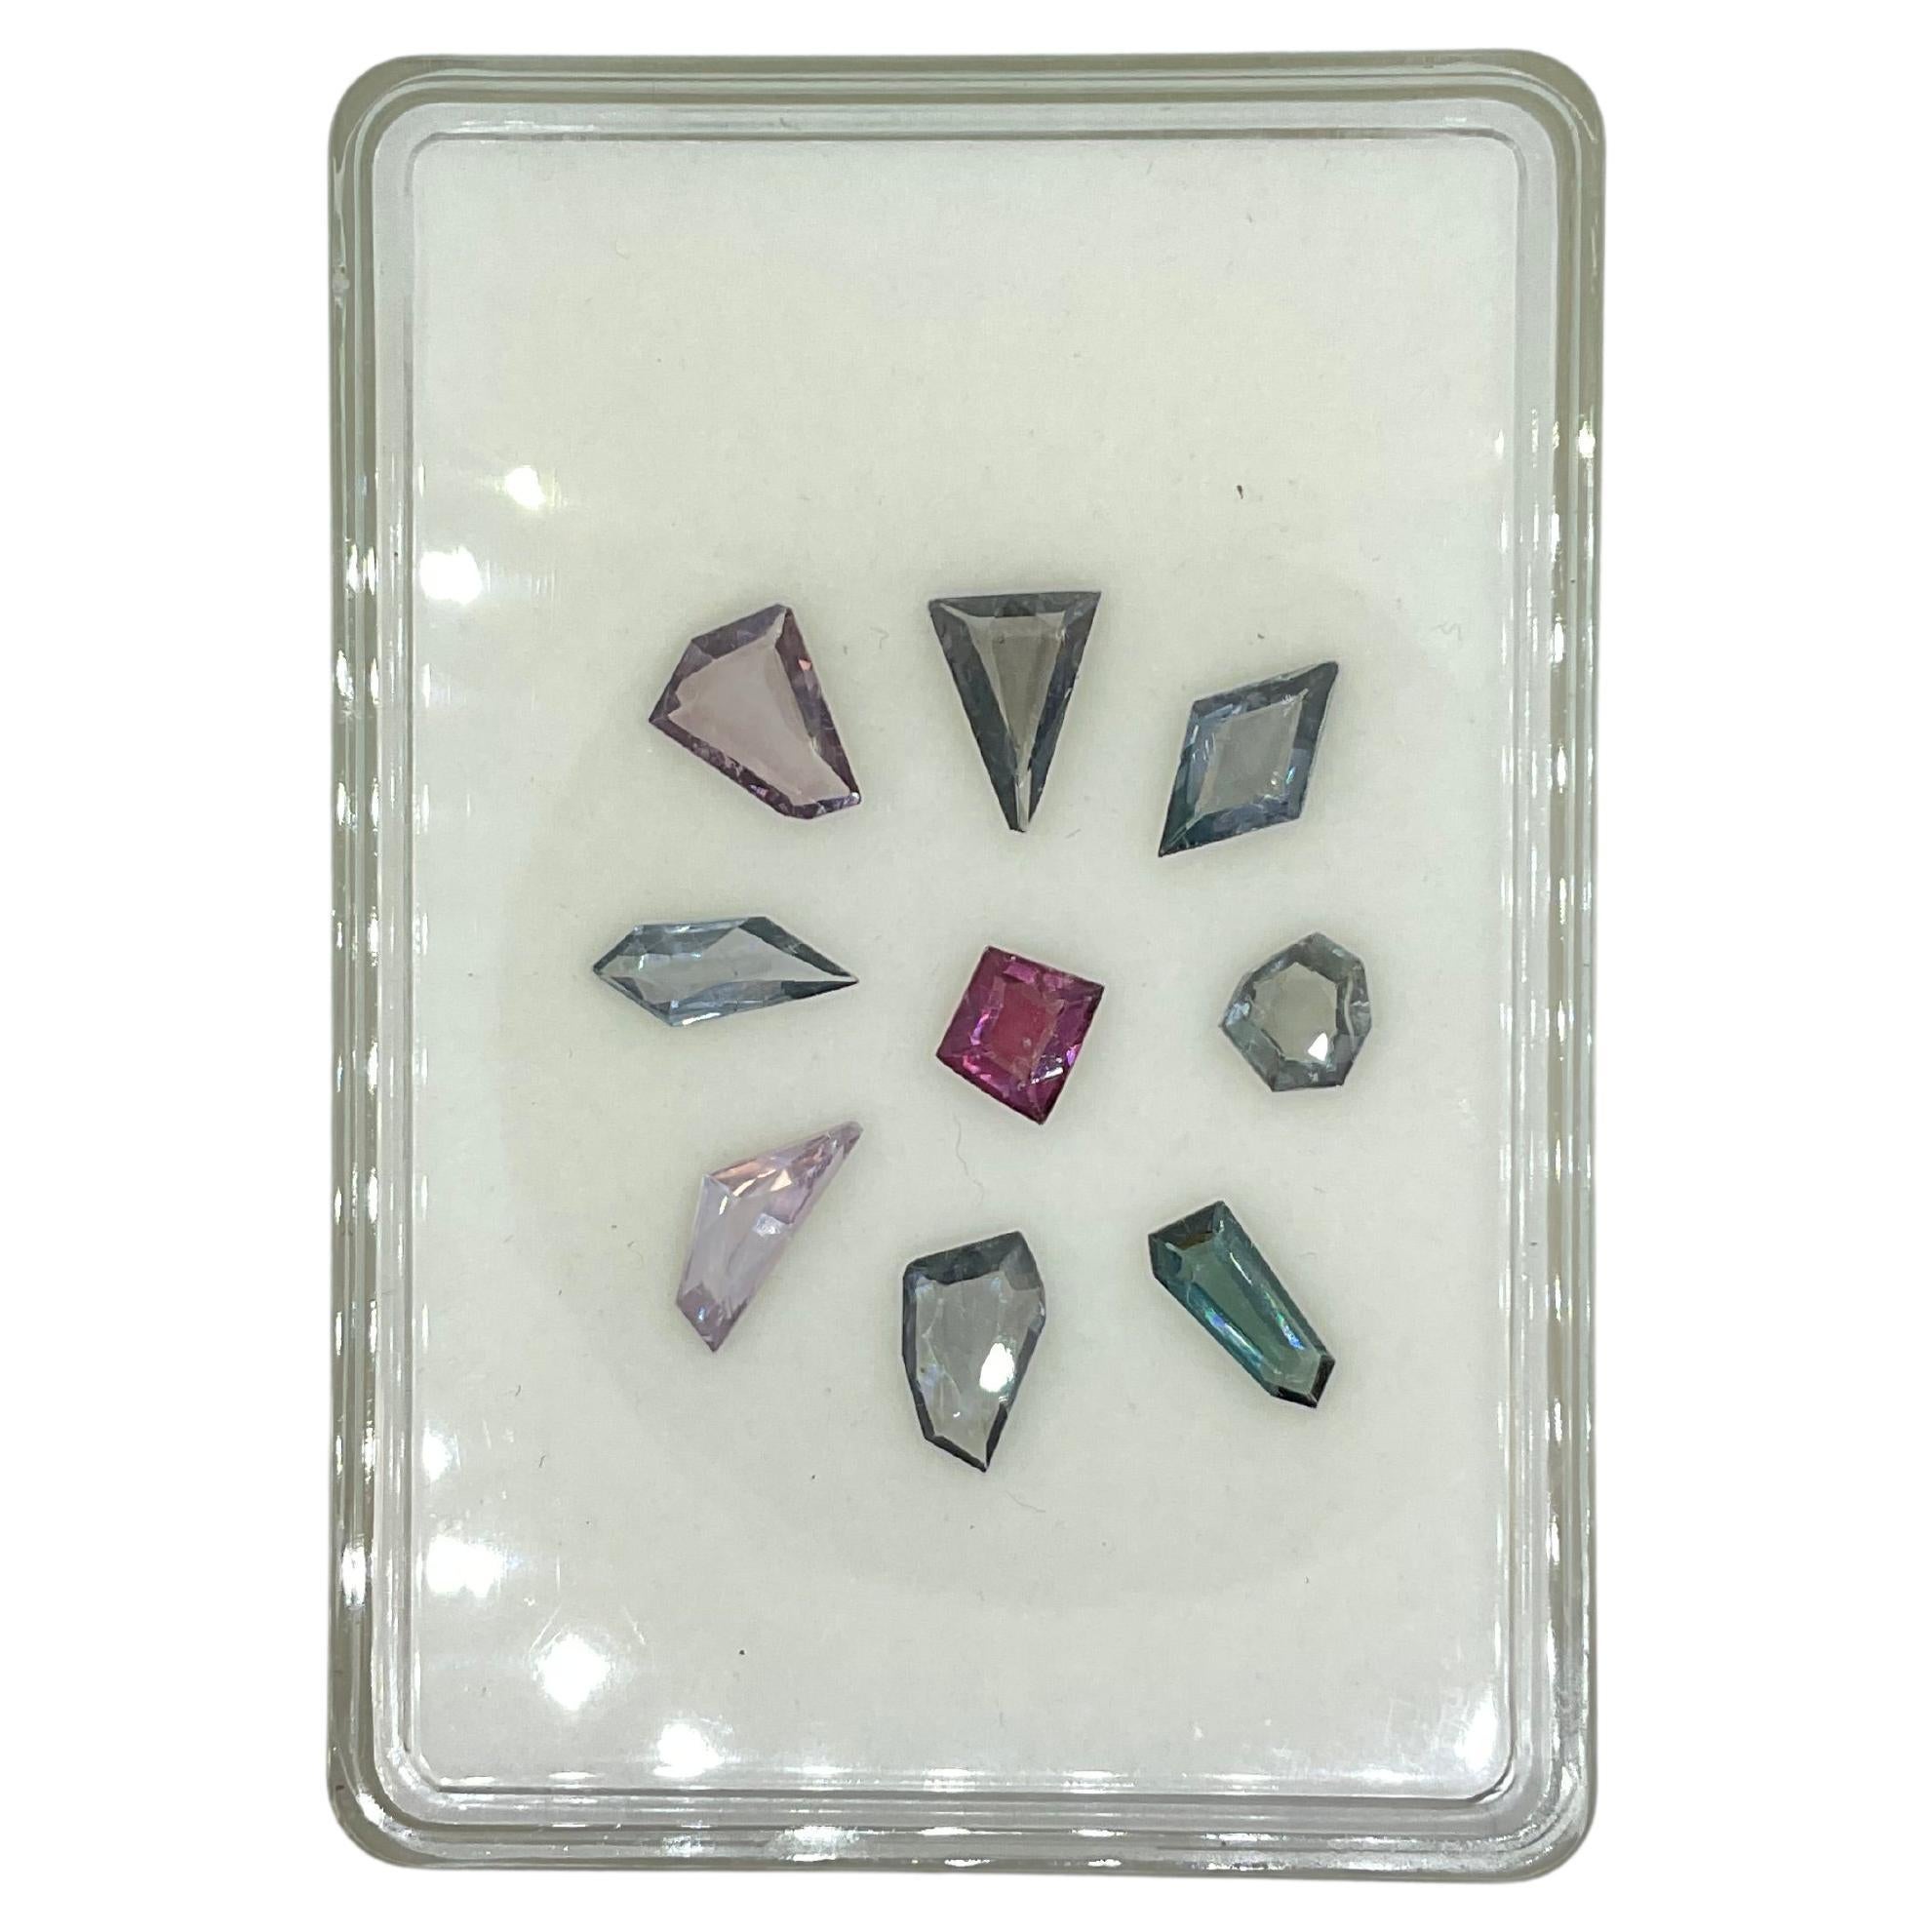 12.20 Carats Grey & Pink Spinel Fancy Cut Stone Natural Gem For earrings For Sale